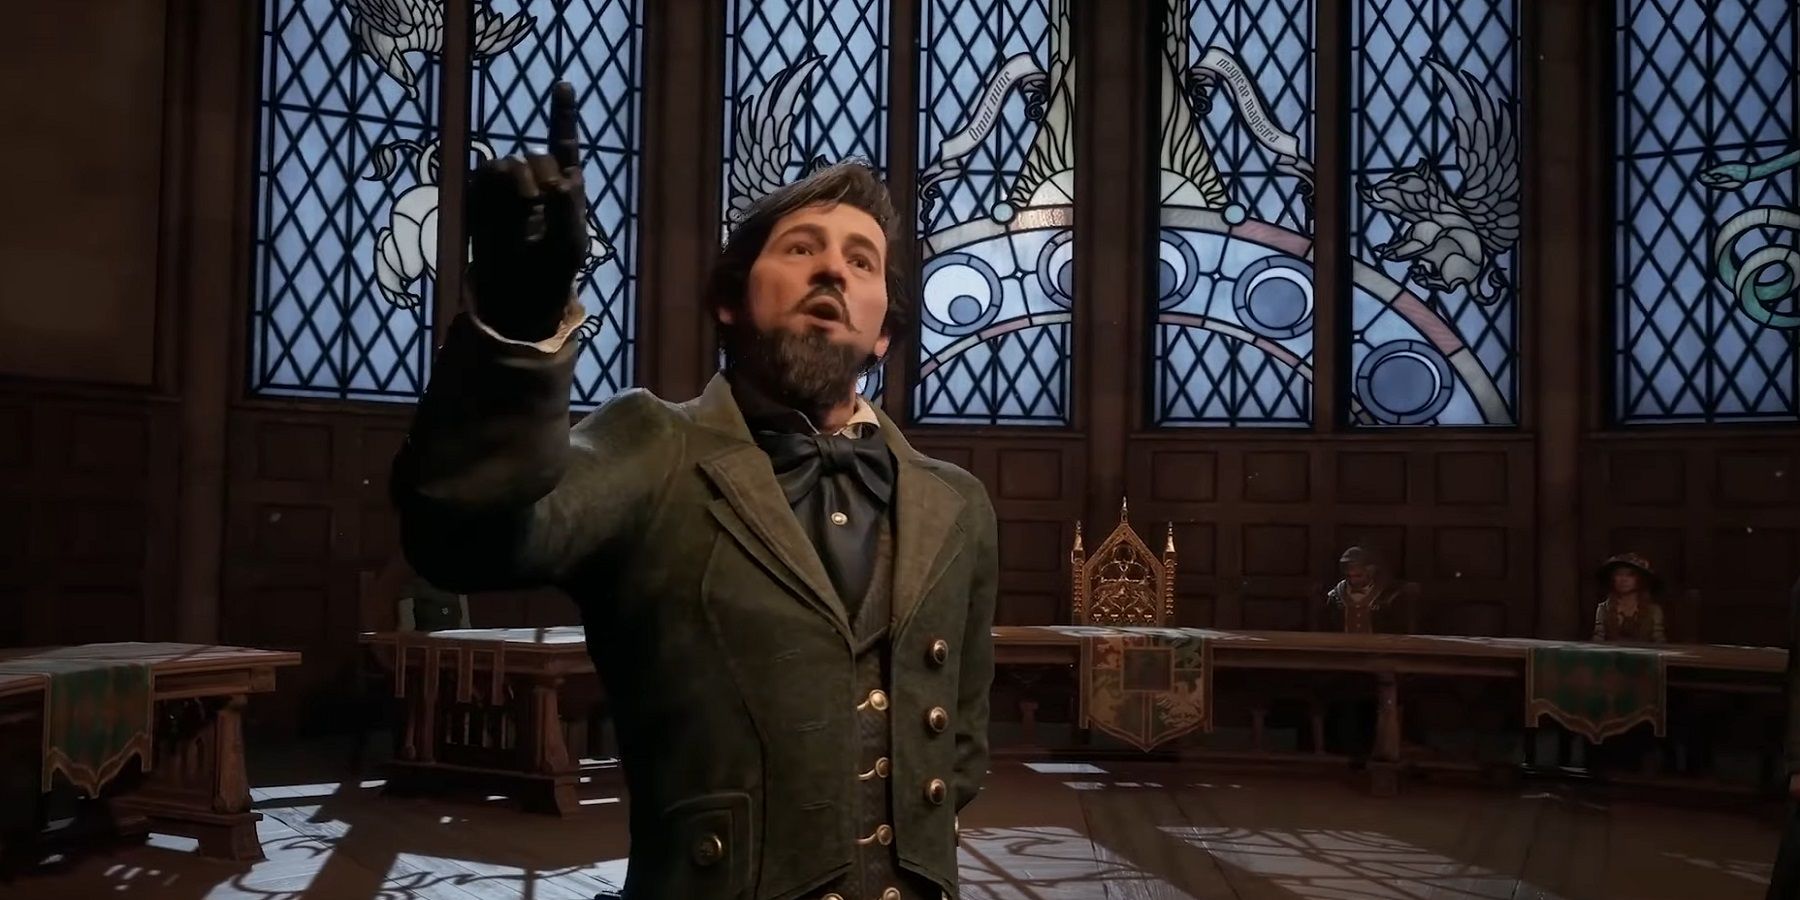 A clip from Hogwarts Legacy hints Headmaster Black shares his family's hateful views of non-pure blood wizards and witches.